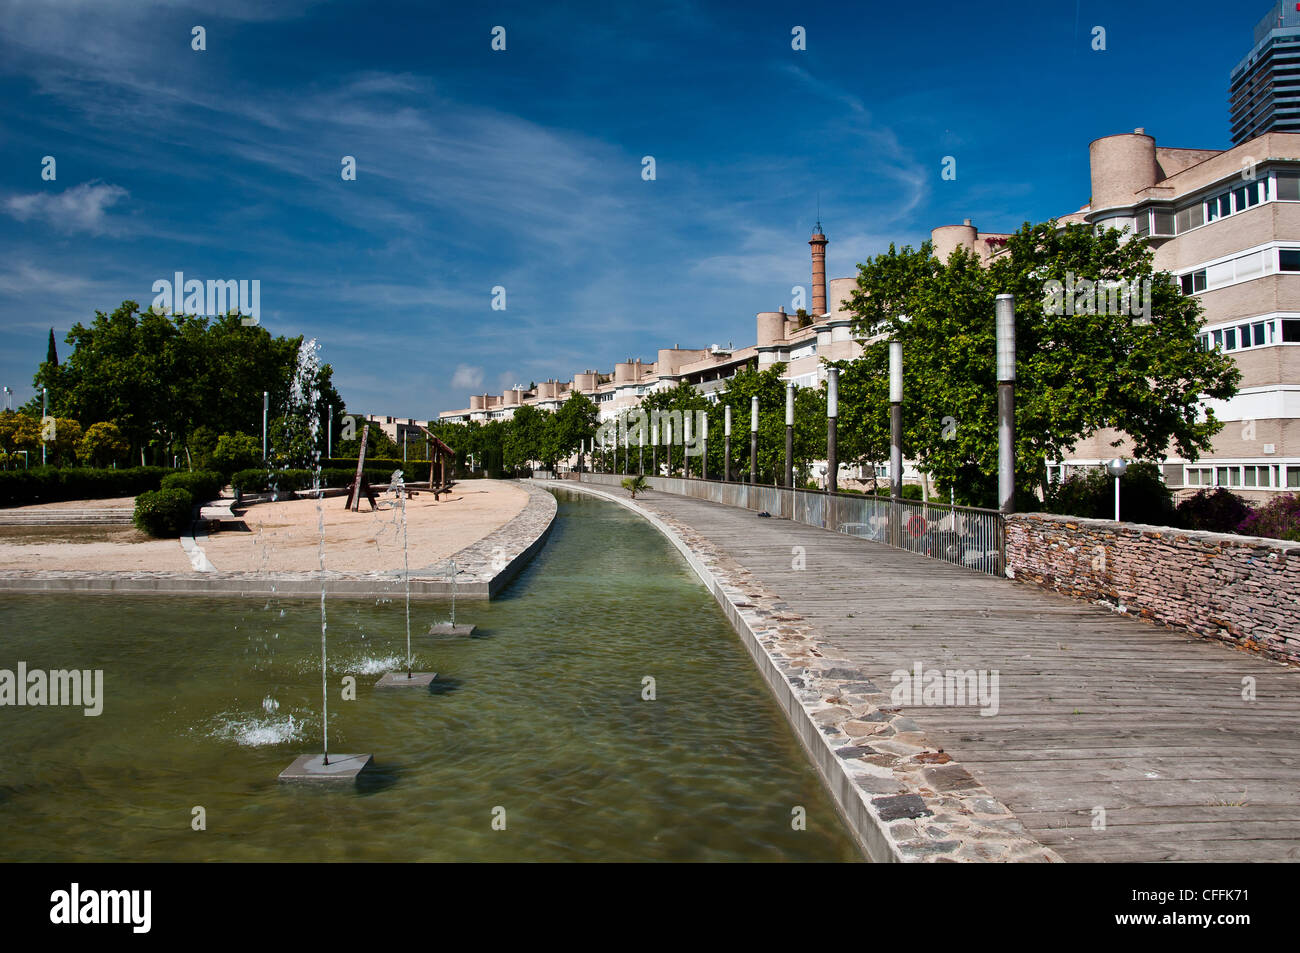 A residential neighbourhood with buildings in a row and a fountain. Stock Photo